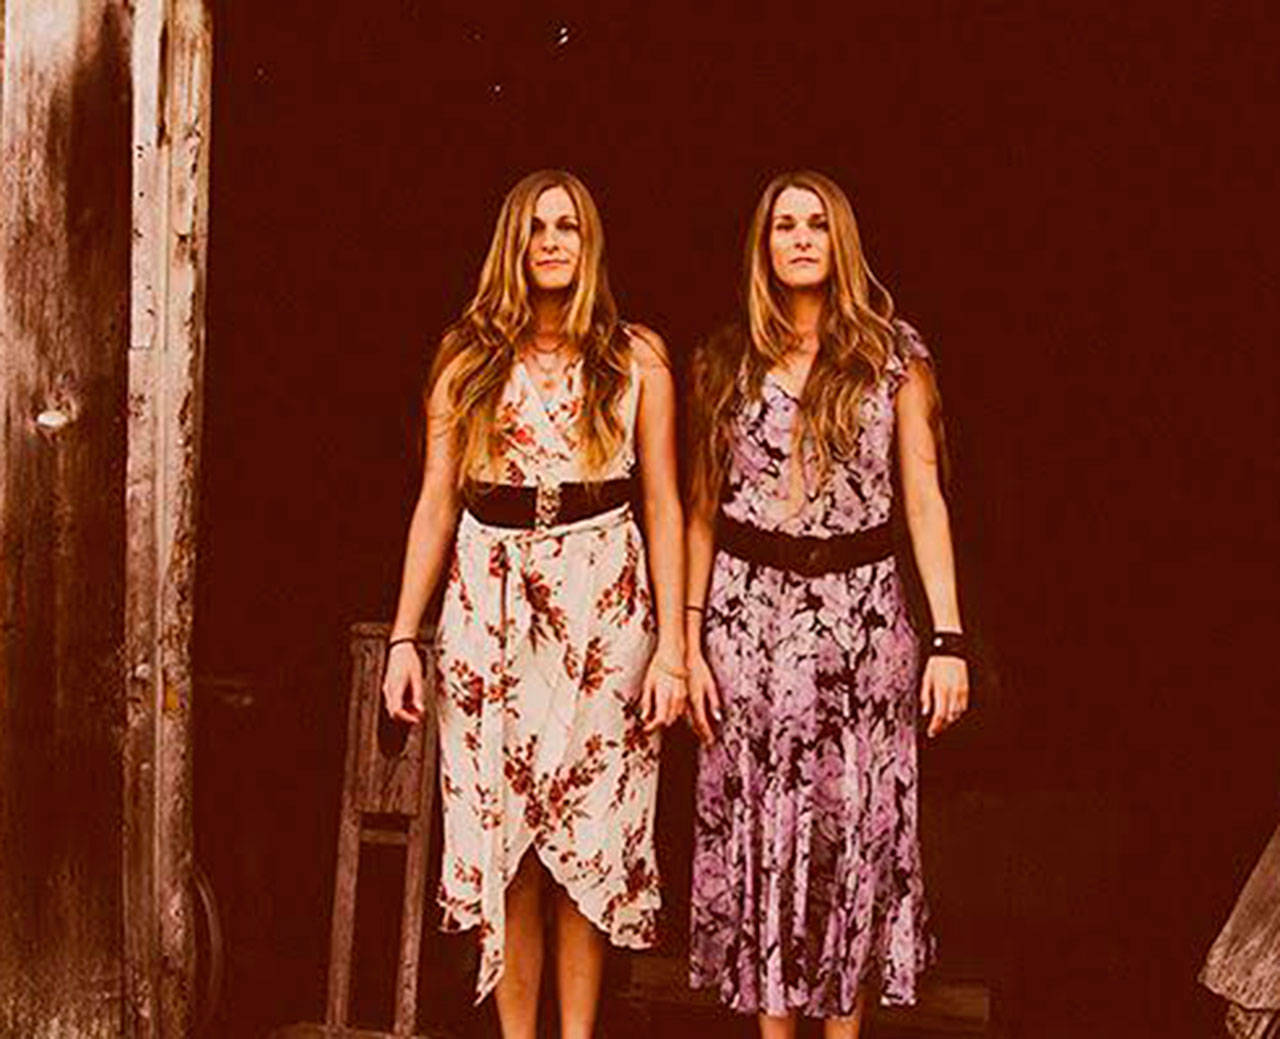 The Shook Twins will perform at the Vashon Theatre. (Courtesy Photo)